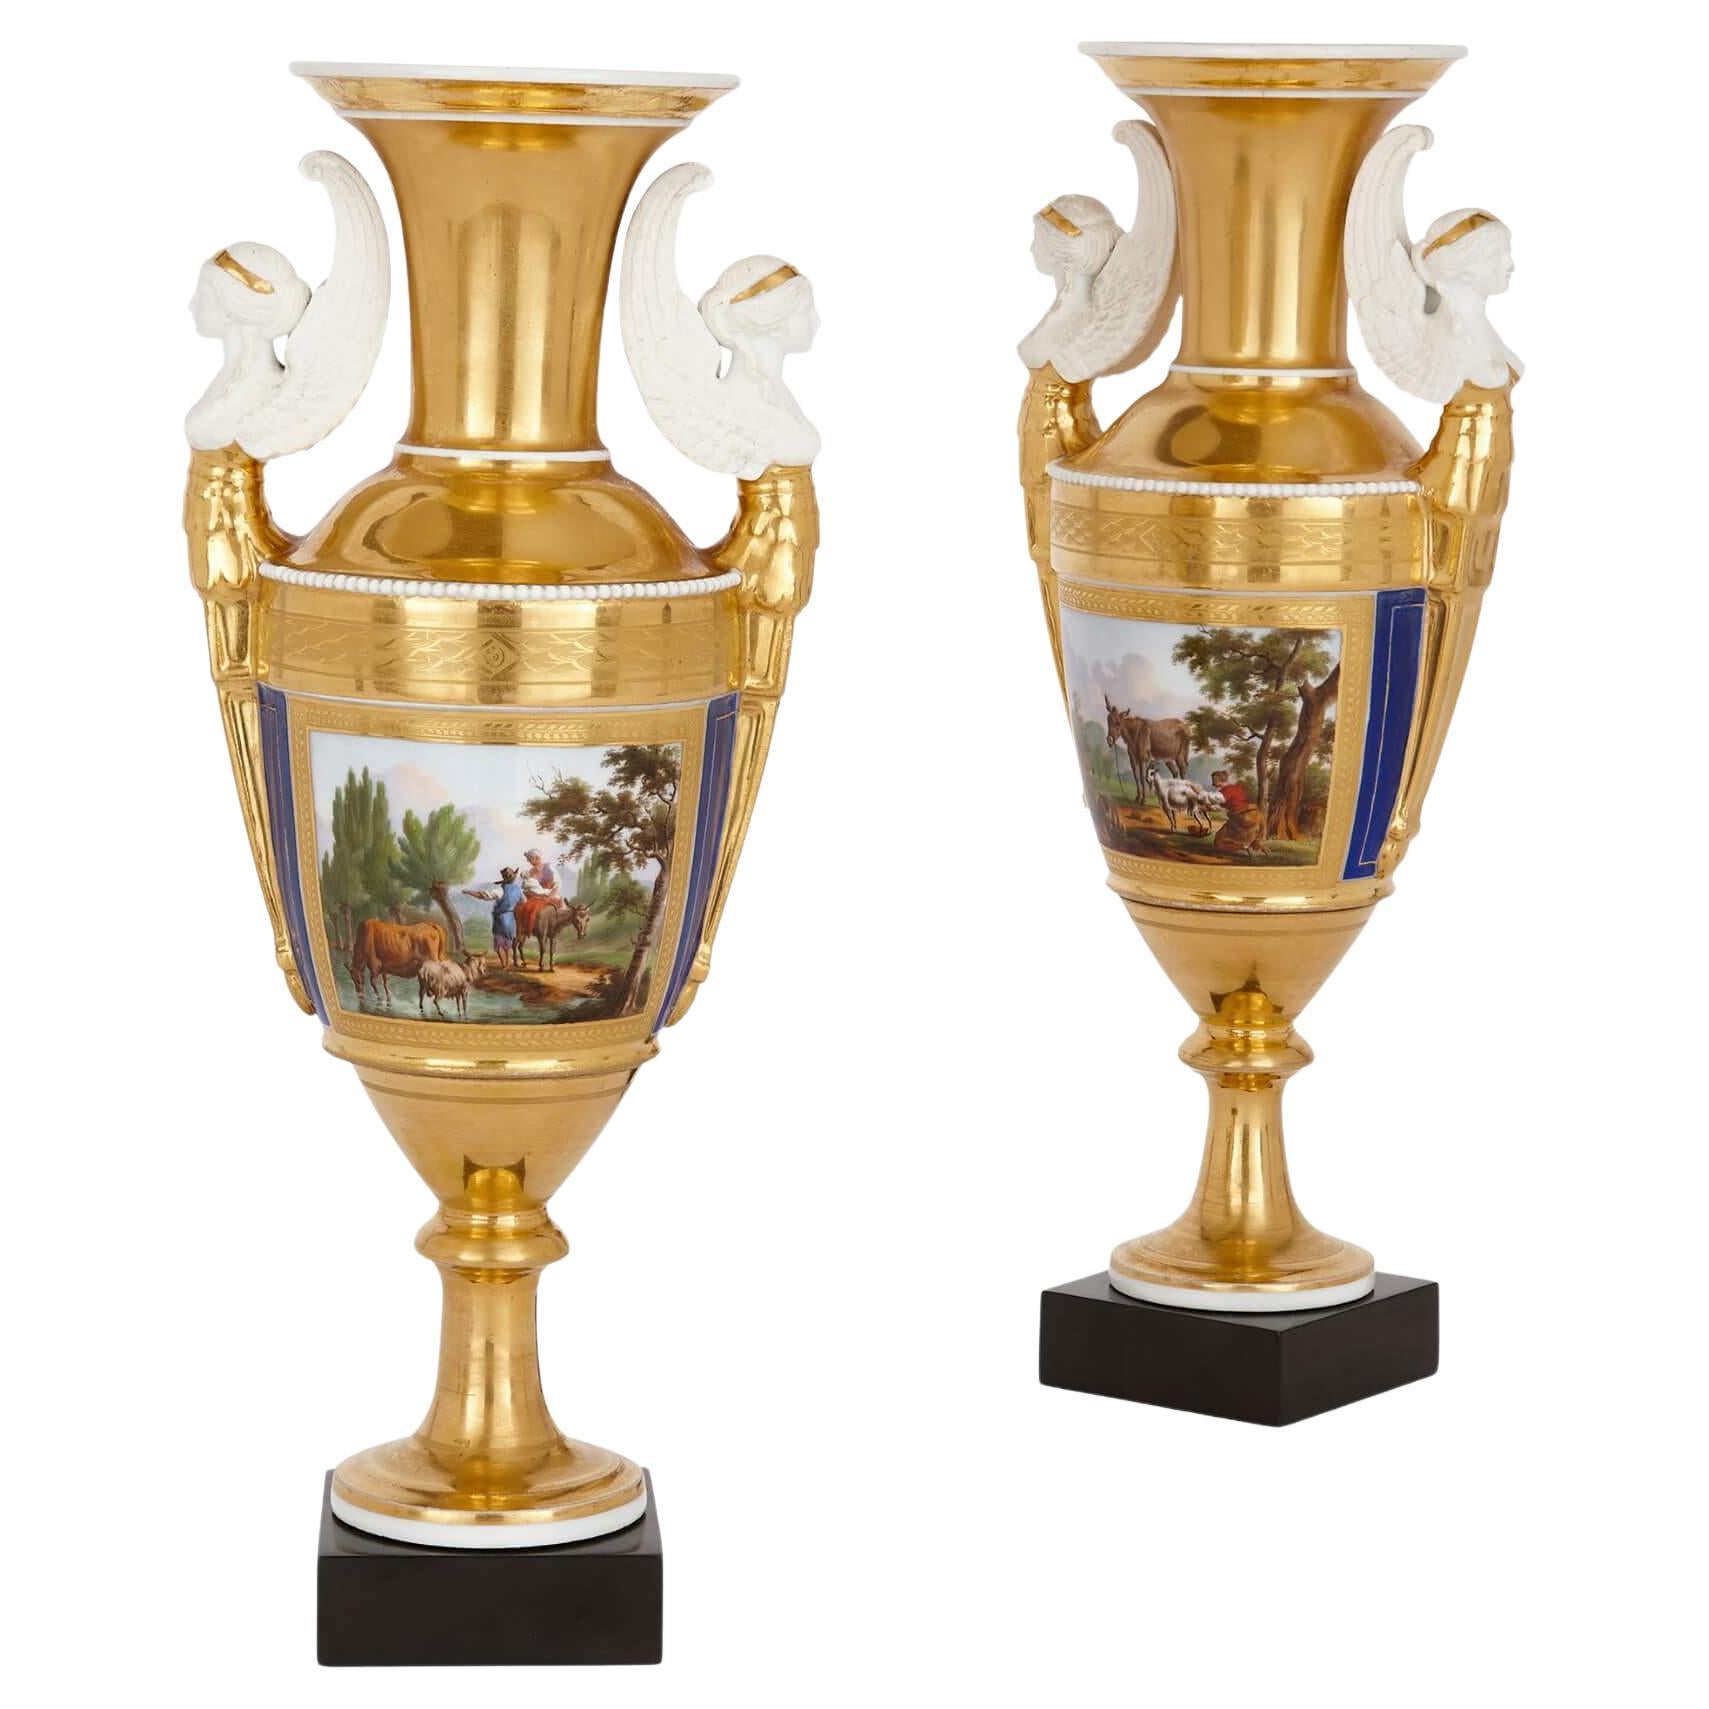 Pair of Neoclassical Paris Porcelain Two-Handled Oviform Vases